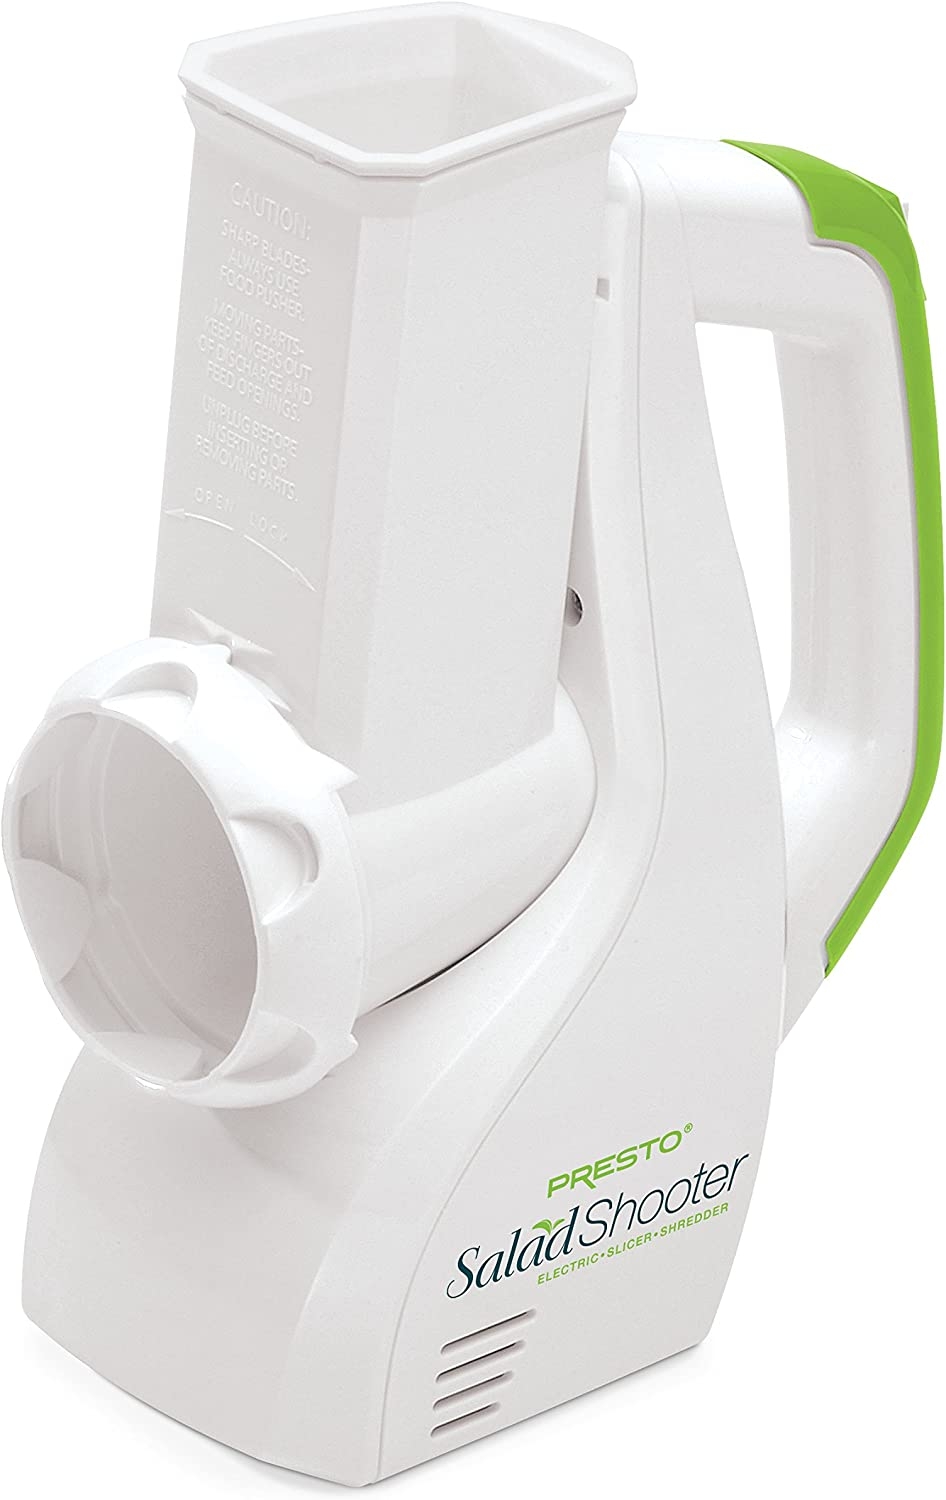 Presto Salad Shooter Electric Slicer/Shredder,White Import To Shop ×Product customization General Description Gallery Reviews